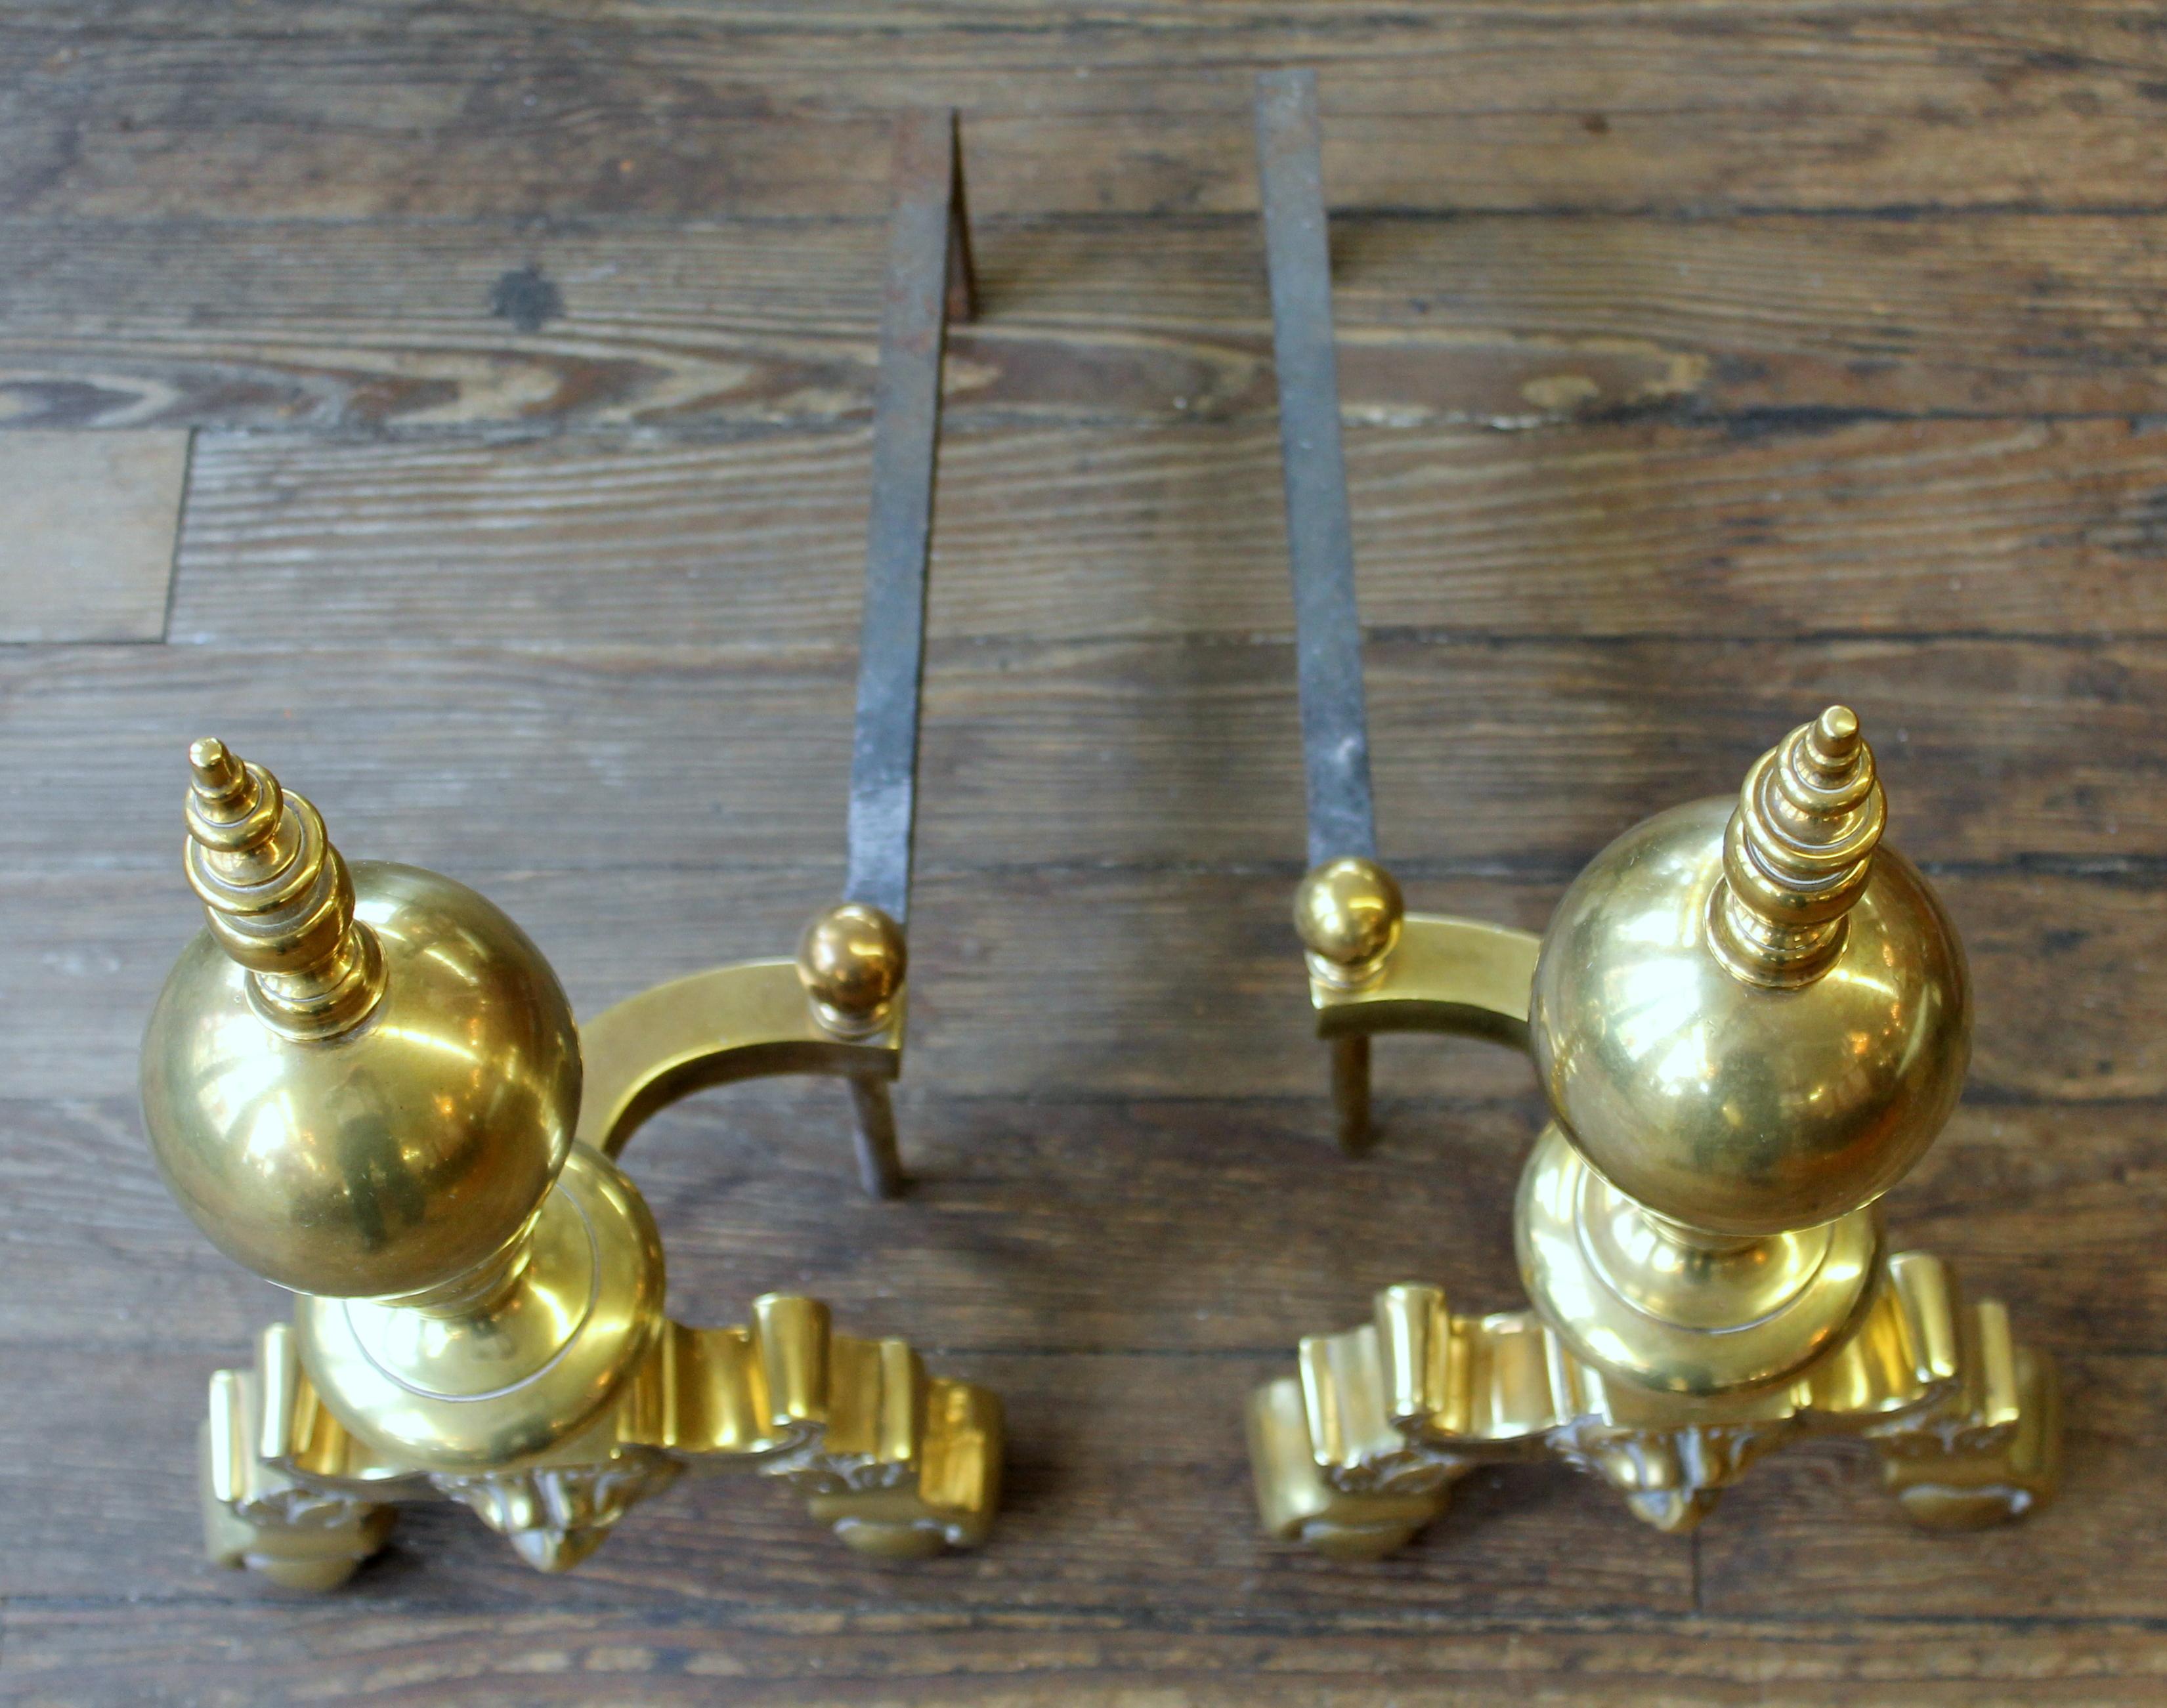 Pair of Old Reprod, Heavy Solid Cast Brass Federal Style 